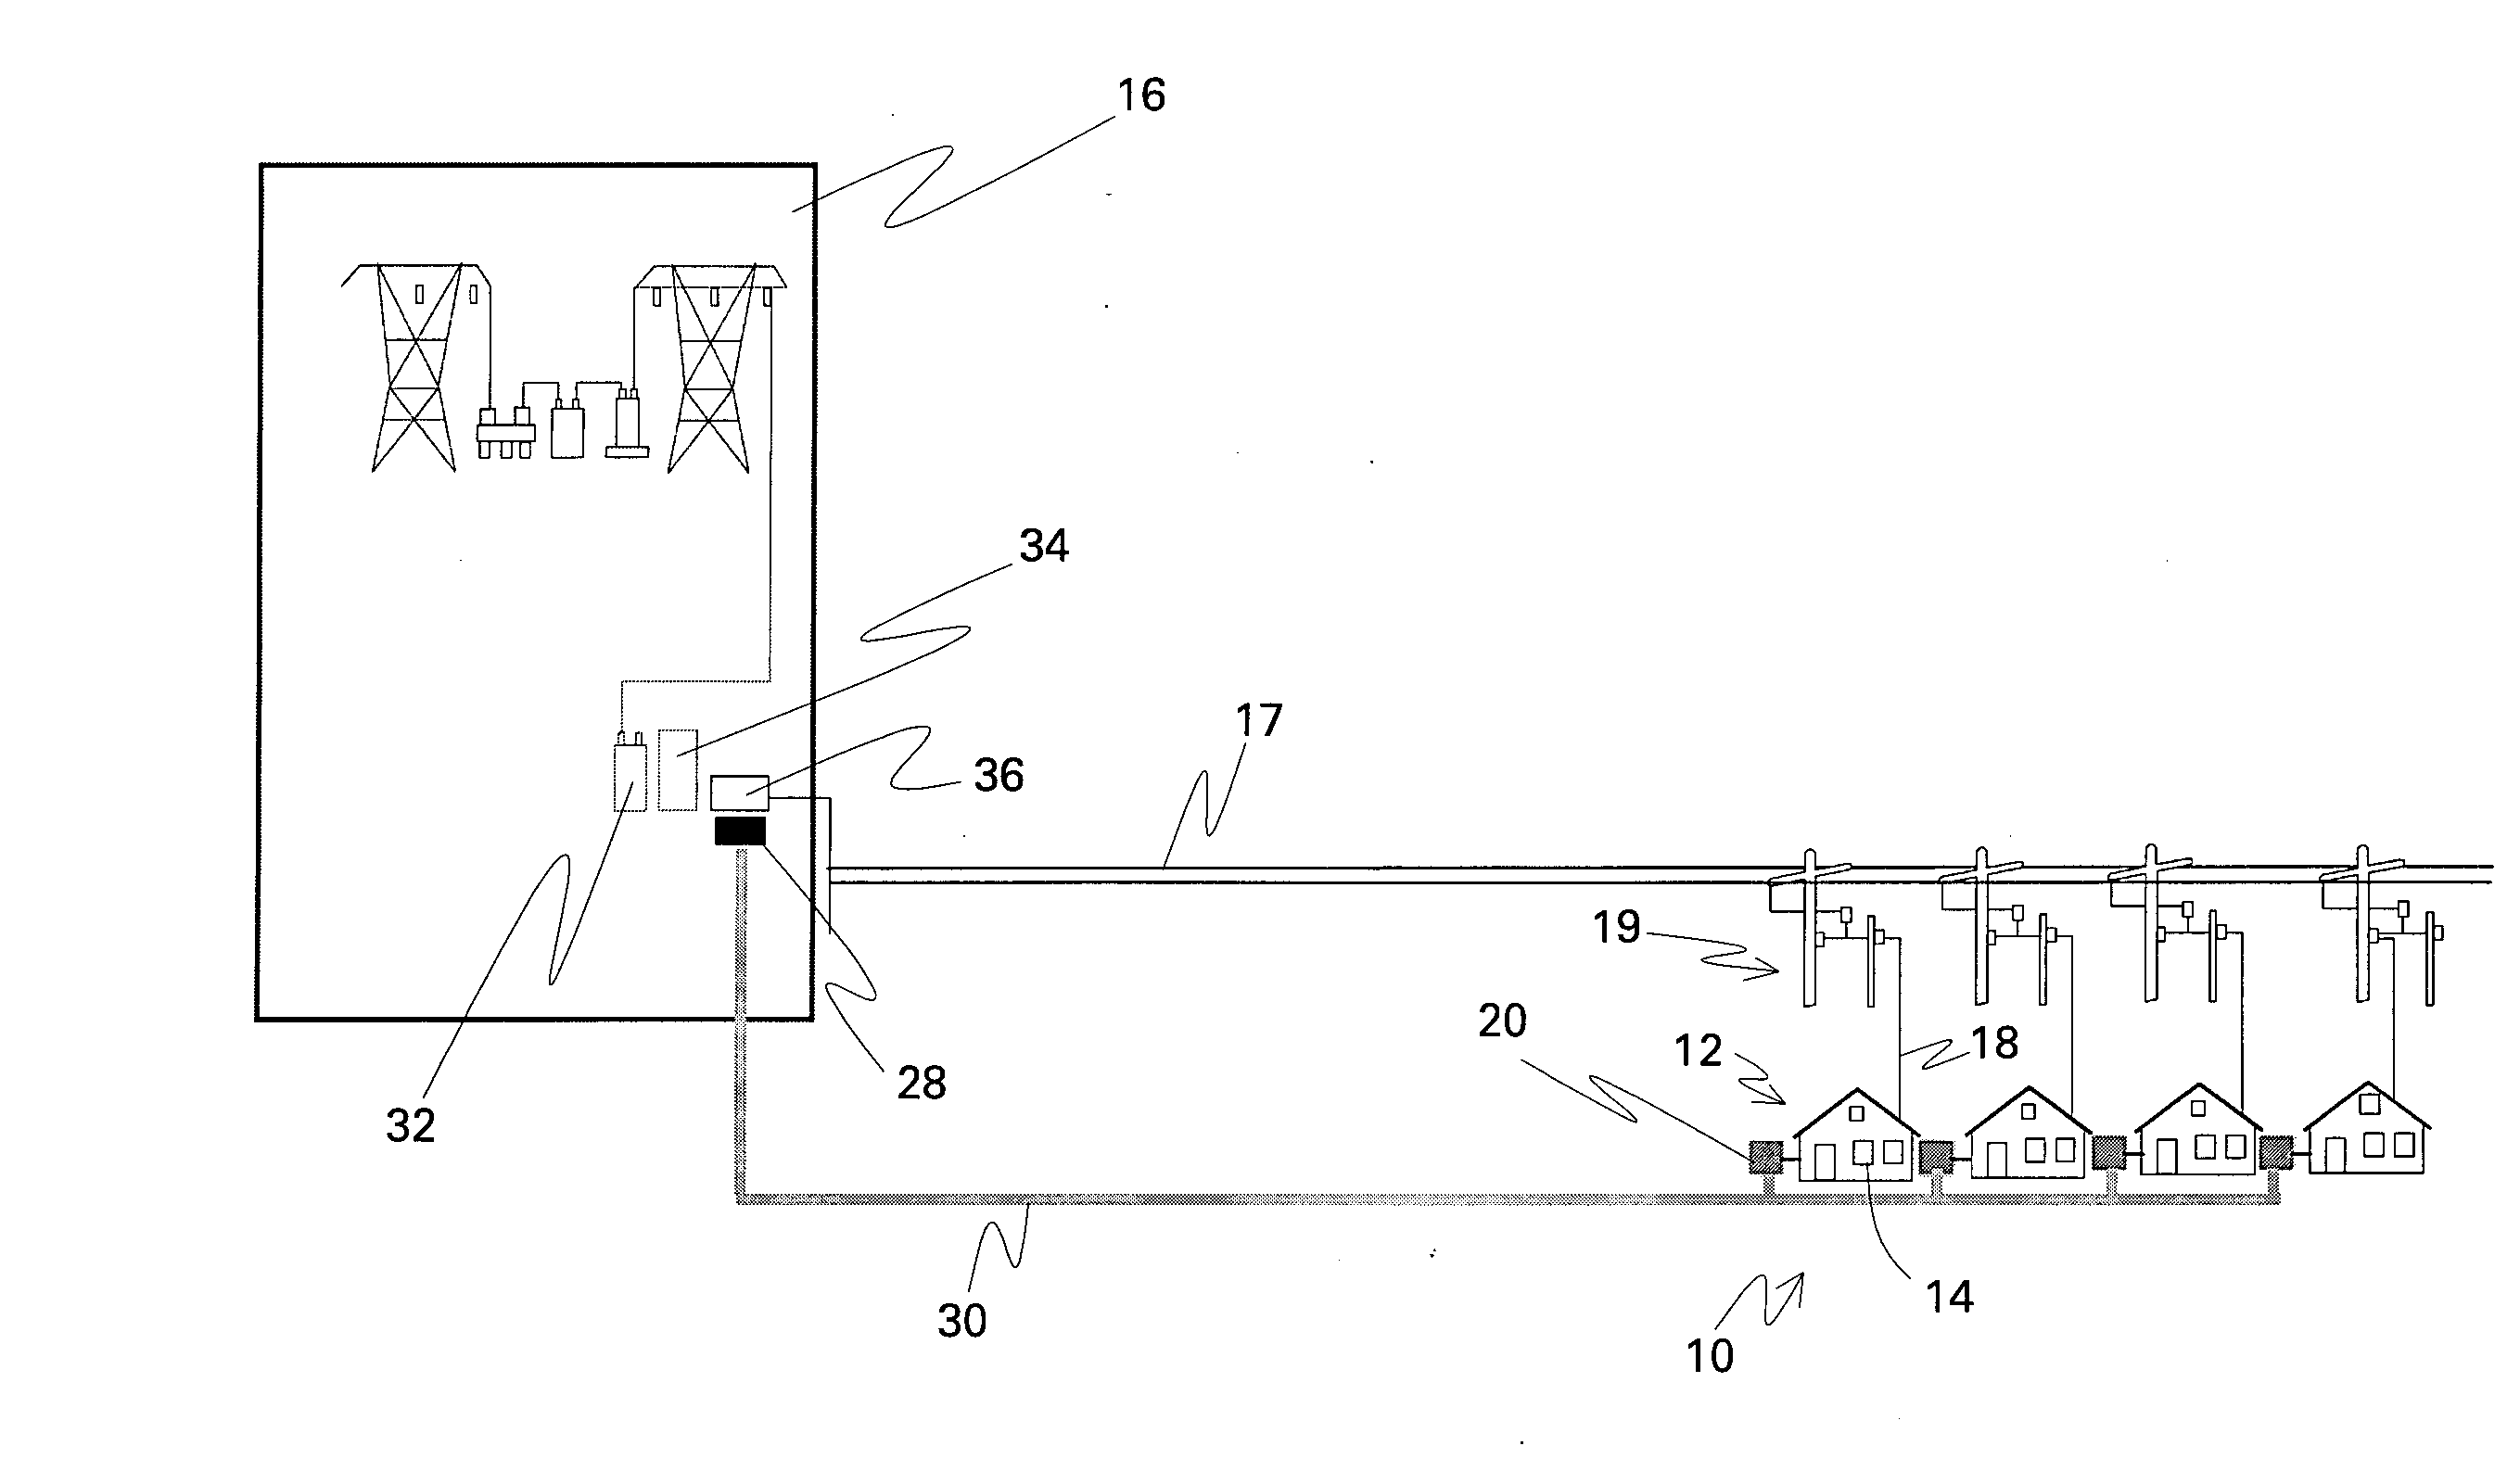 System and method for providing reactive power support with distributed energy resource inverter